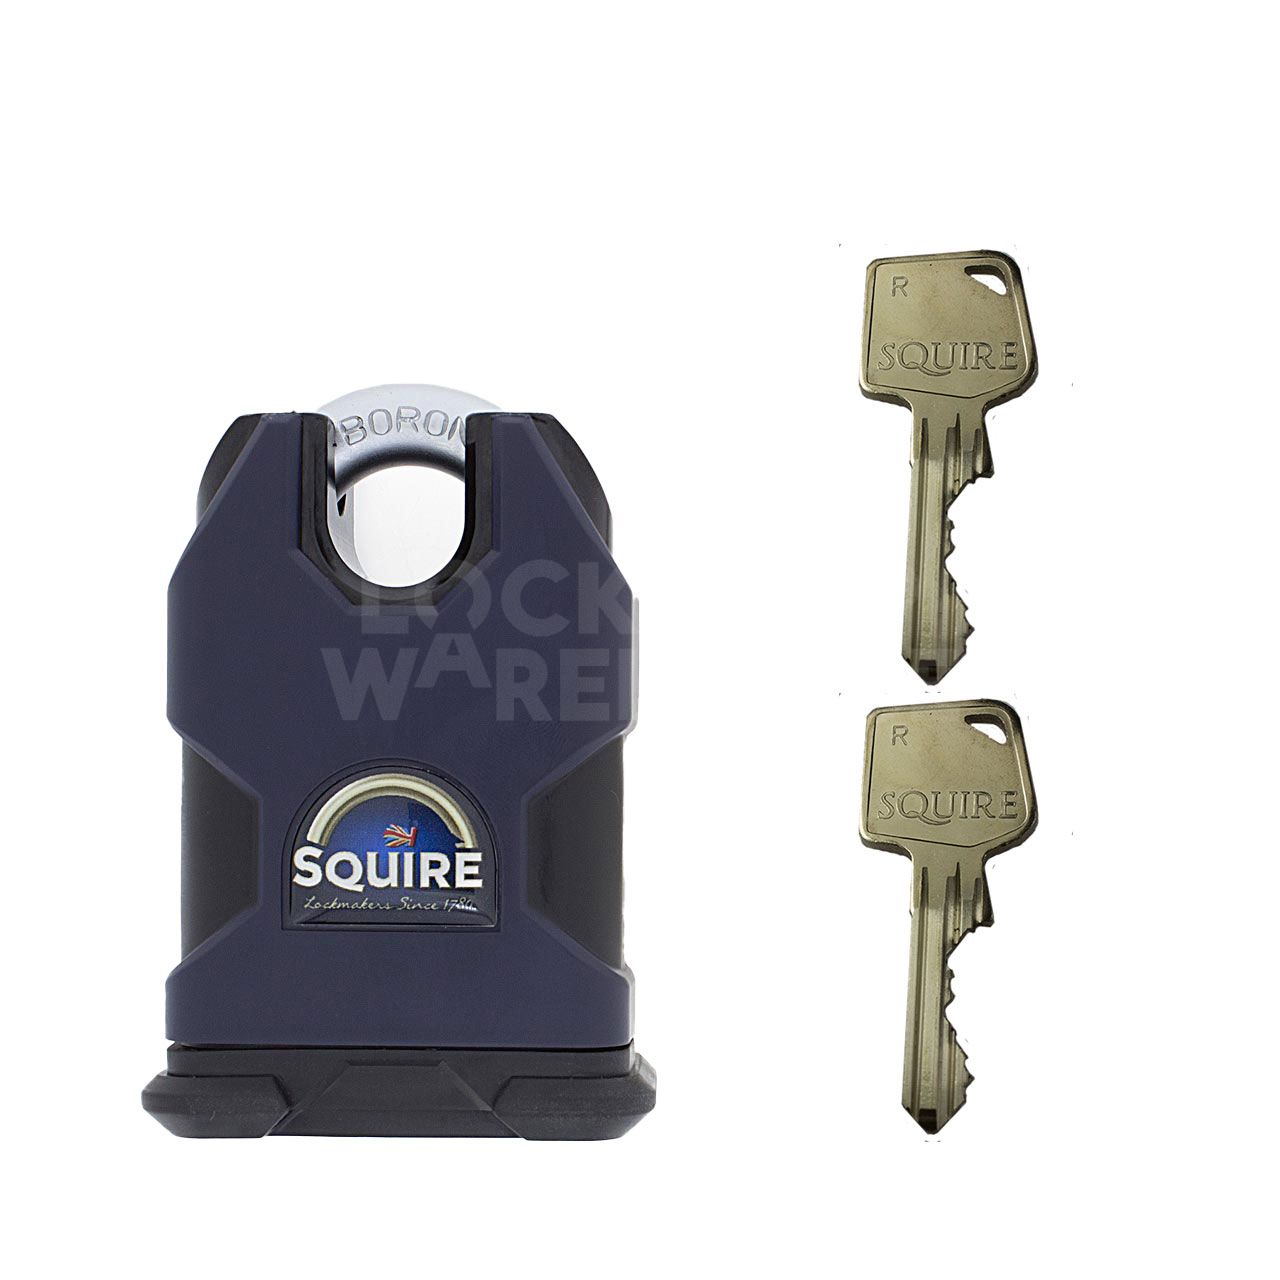 Dimensions Image: SQUIRE Stronghold® SS50CS Padlock with Registered key Section